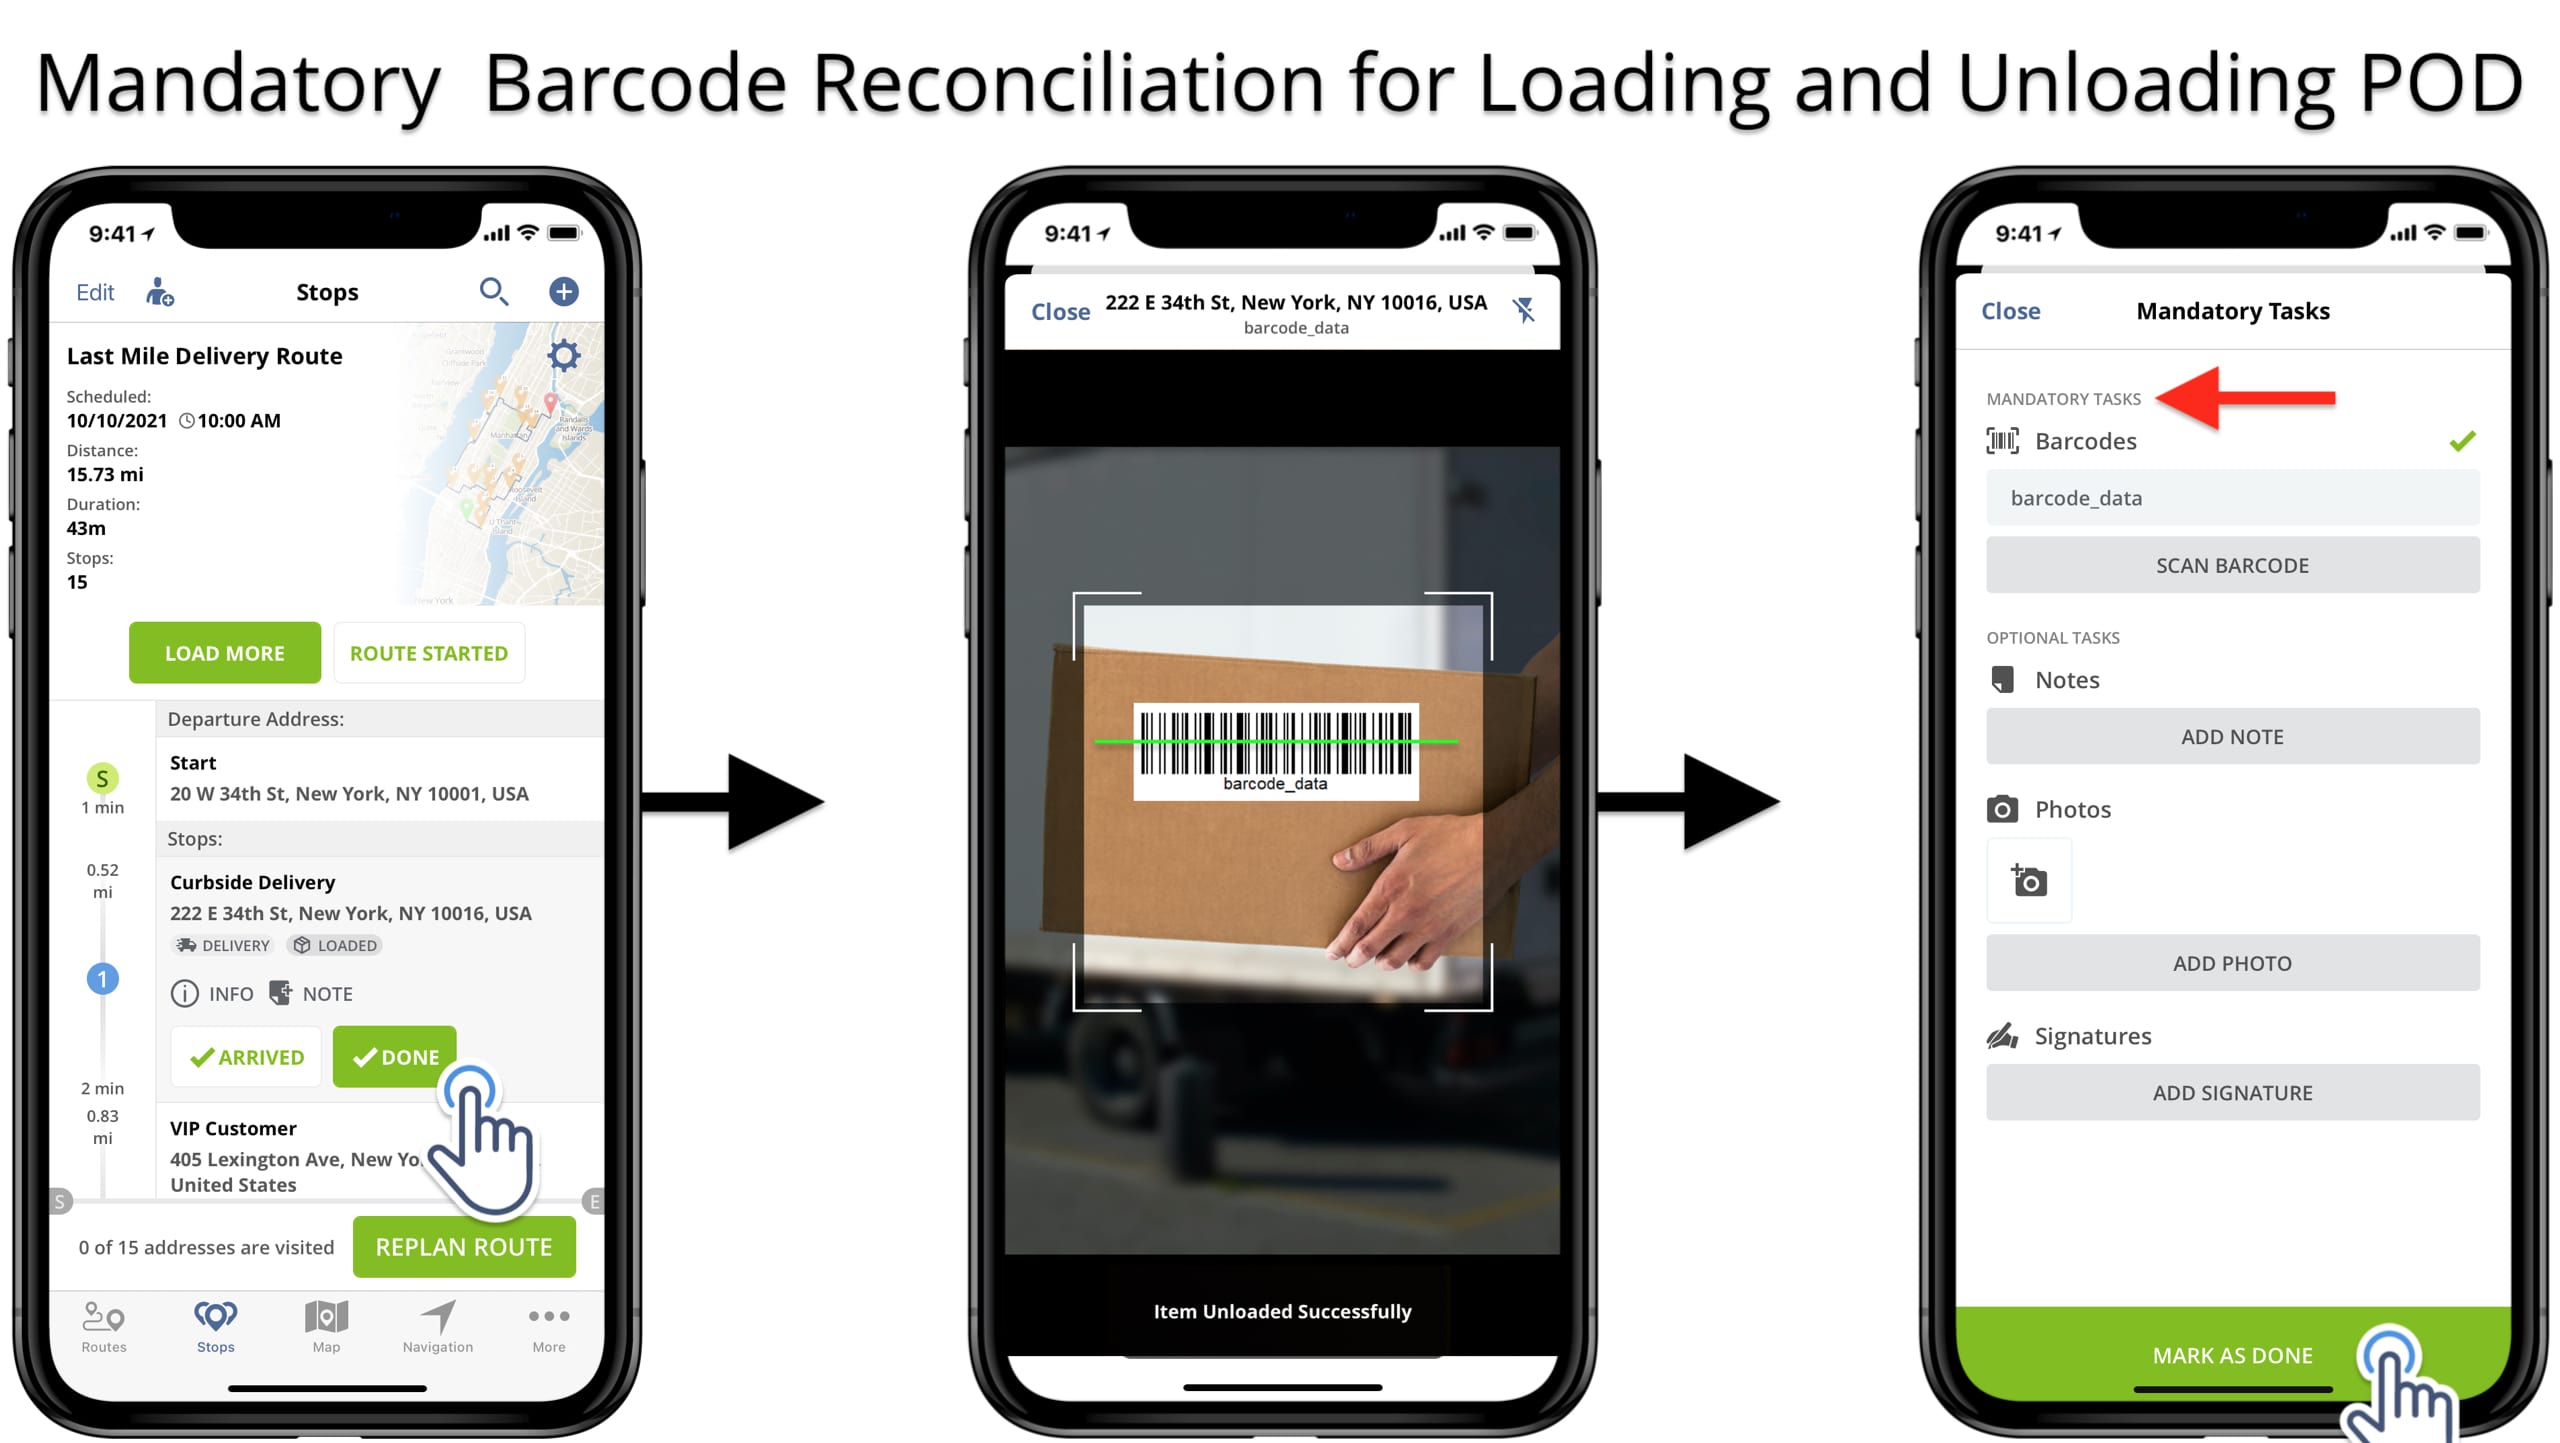 Route planner barcode scanner app for mandatory QR code and barcode POD reconciliation.